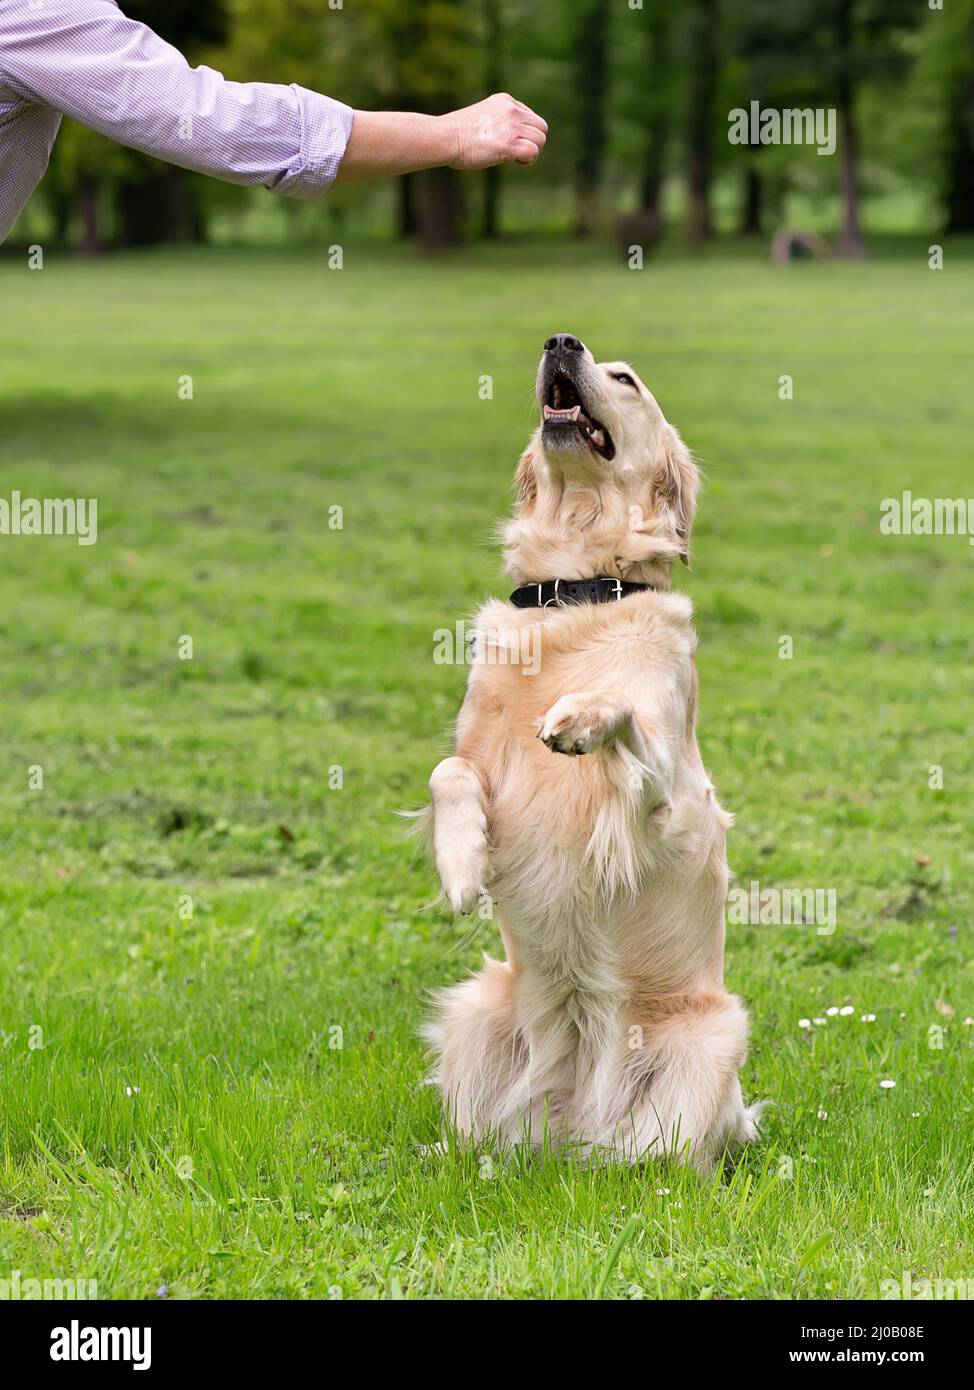 Golden retriever sitting up and begging Stock Photo